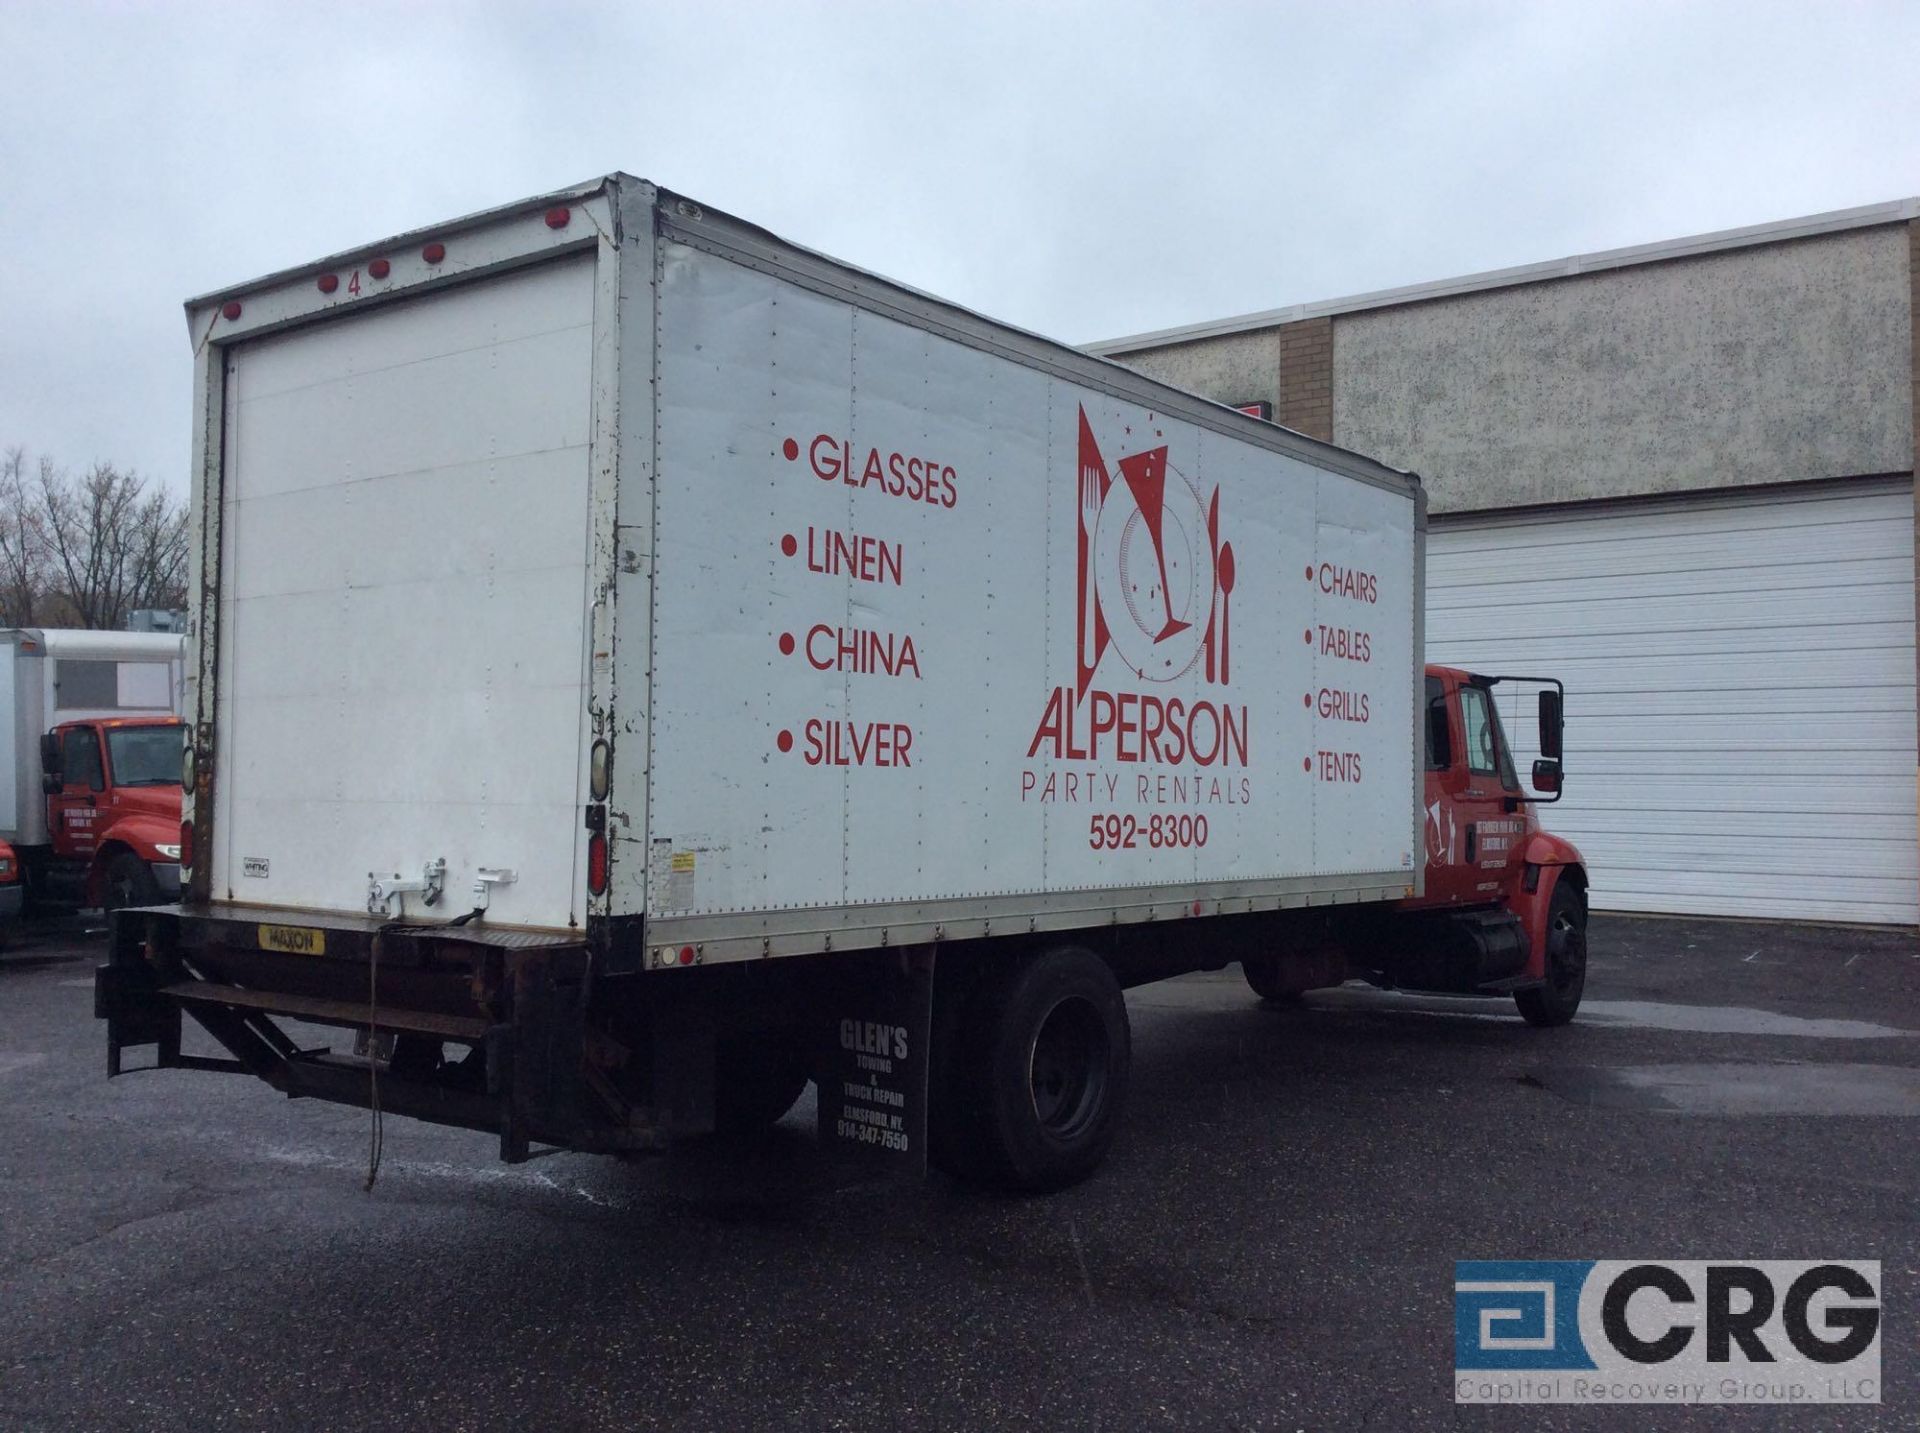 2006 International 20' box truck w/Extended Cab, DT466 ENGINE, A/T, Vinyl interior, Morgan 20' box - Image 3 of 8